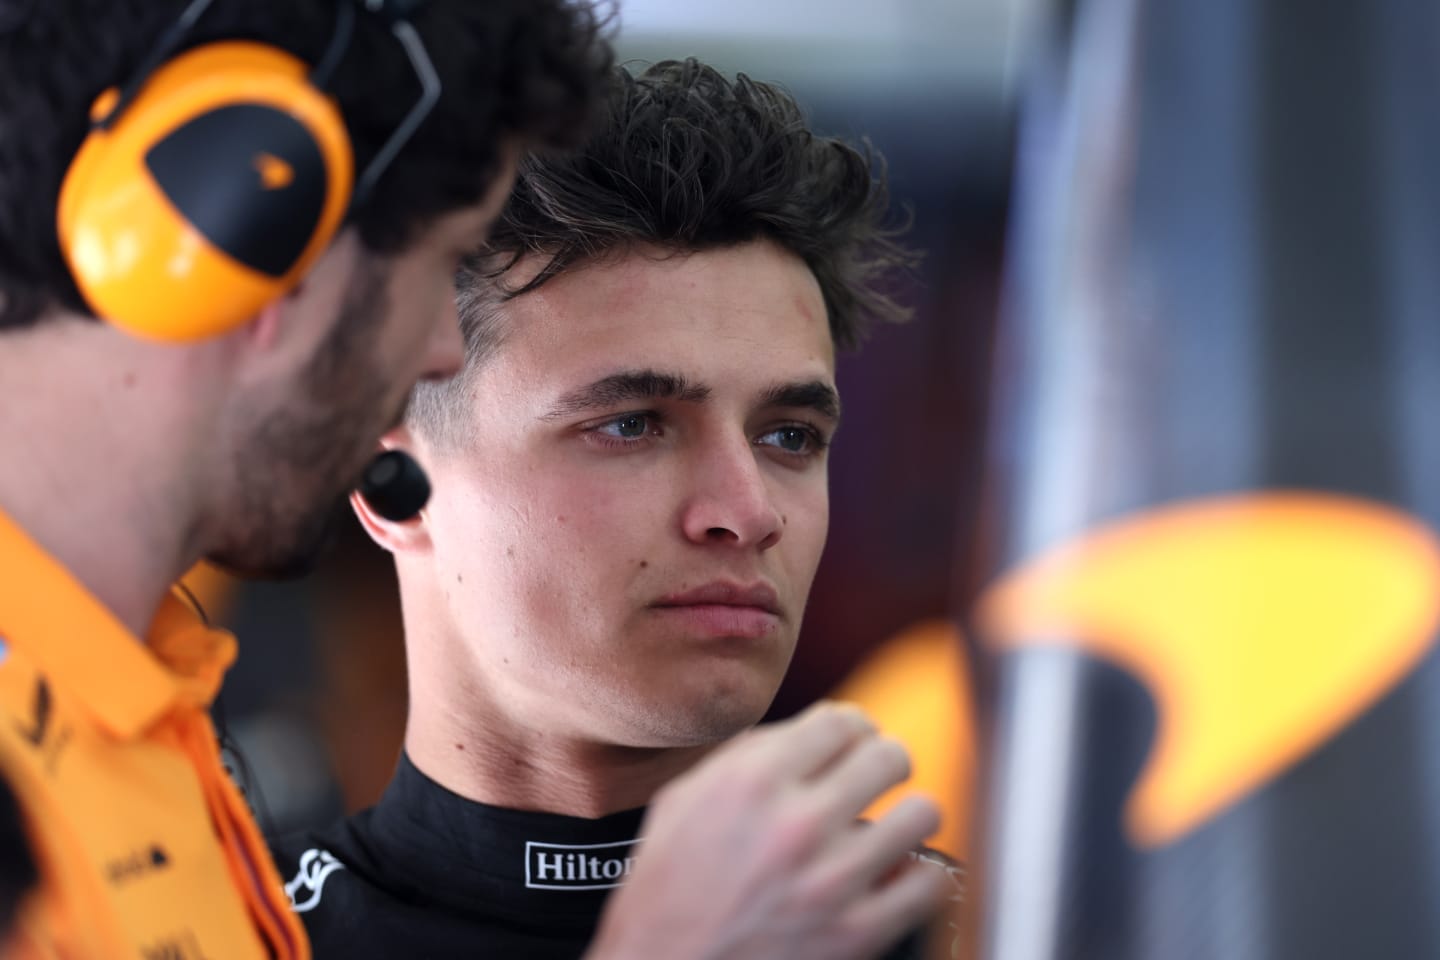 BAHRAIN, BAHRAIN - MARCH 03: Lando Norris of Great Britain driving the (4) McLaren MCL60 Mercedes looks on in the garage during practice ahead of the F1 Grand Prix of Bahrain at Bahrain International Circuit on March 03, 2023 in Bahrain, Bahrain. (Photo by Lars Baron/Getty Images)